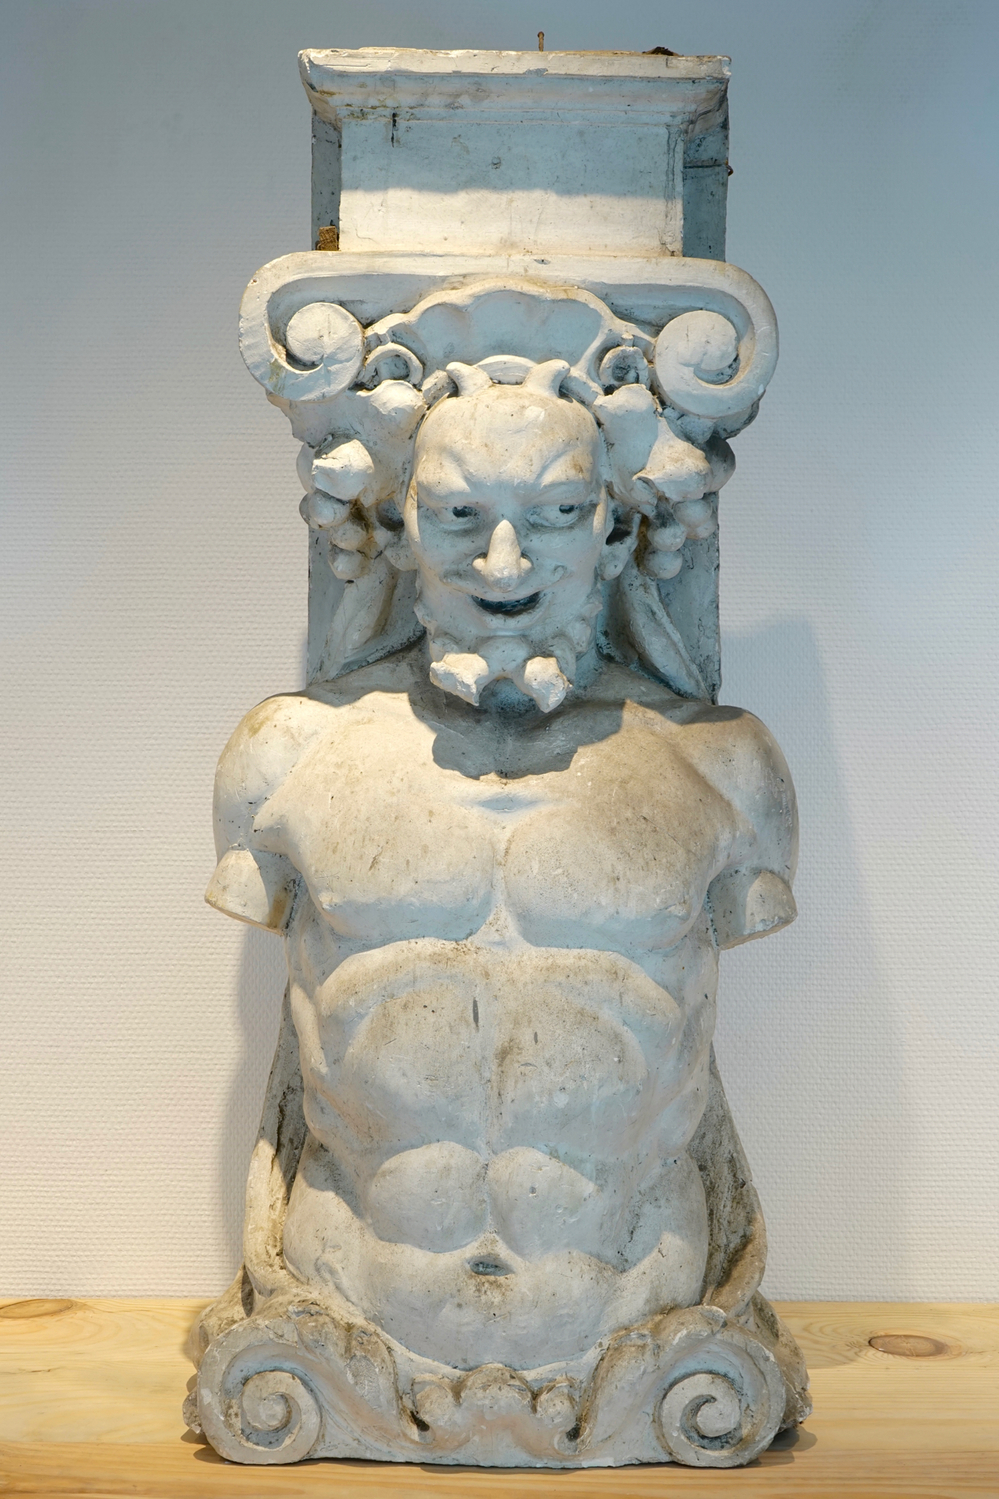 A plaster cast of an atlas or telamon, 19/20th C., Bruges